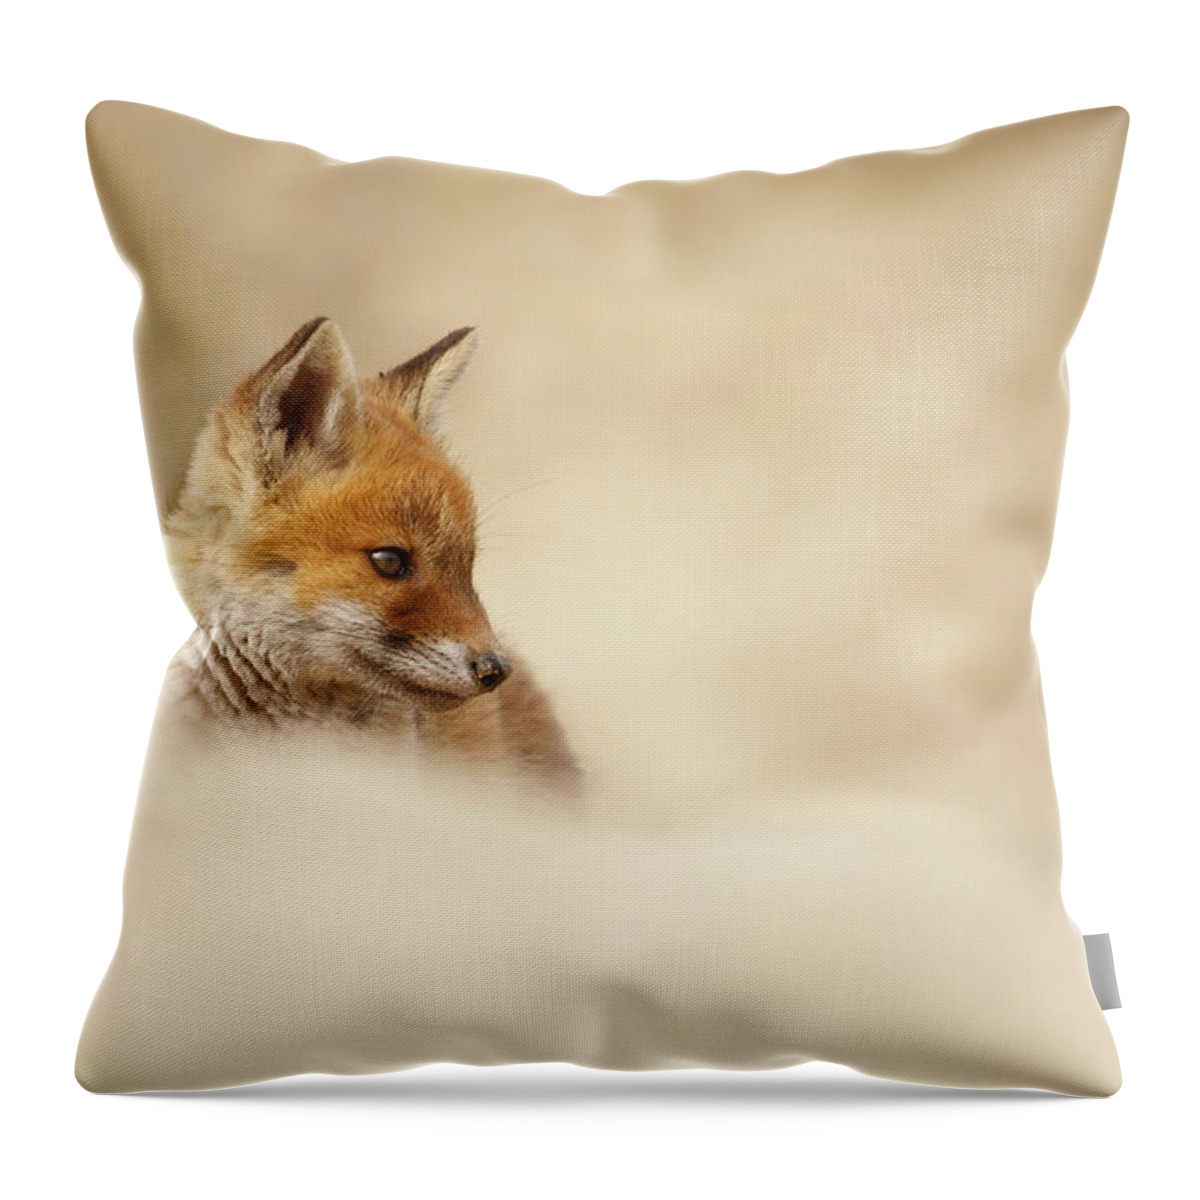 Cub Throw Pillow featuring the photograph Young Fox Series - Contemplating Cub by Roeselien Raimond